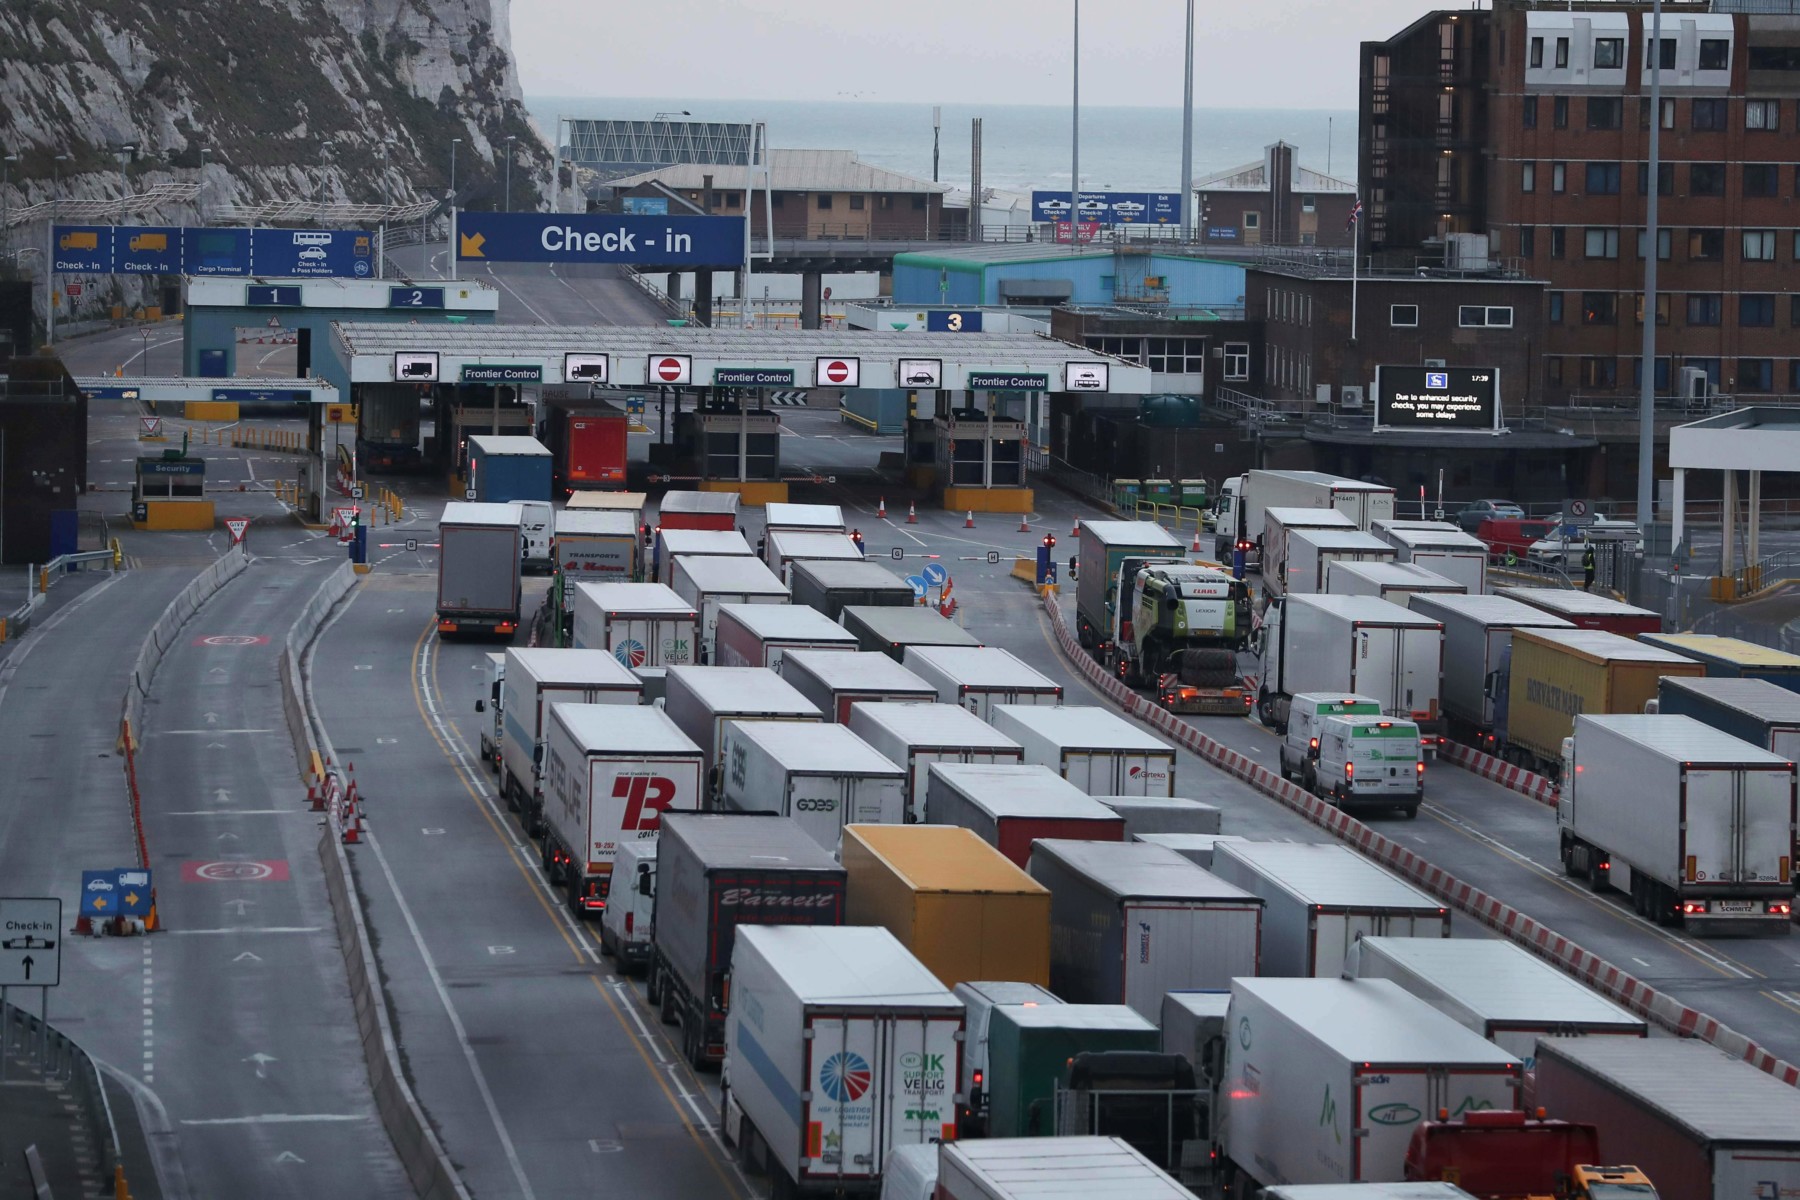 The EU hope that the threat of lorries backing up from Dover and clogging up the Kent countryside will be enough of a threat to strike a favourable deal